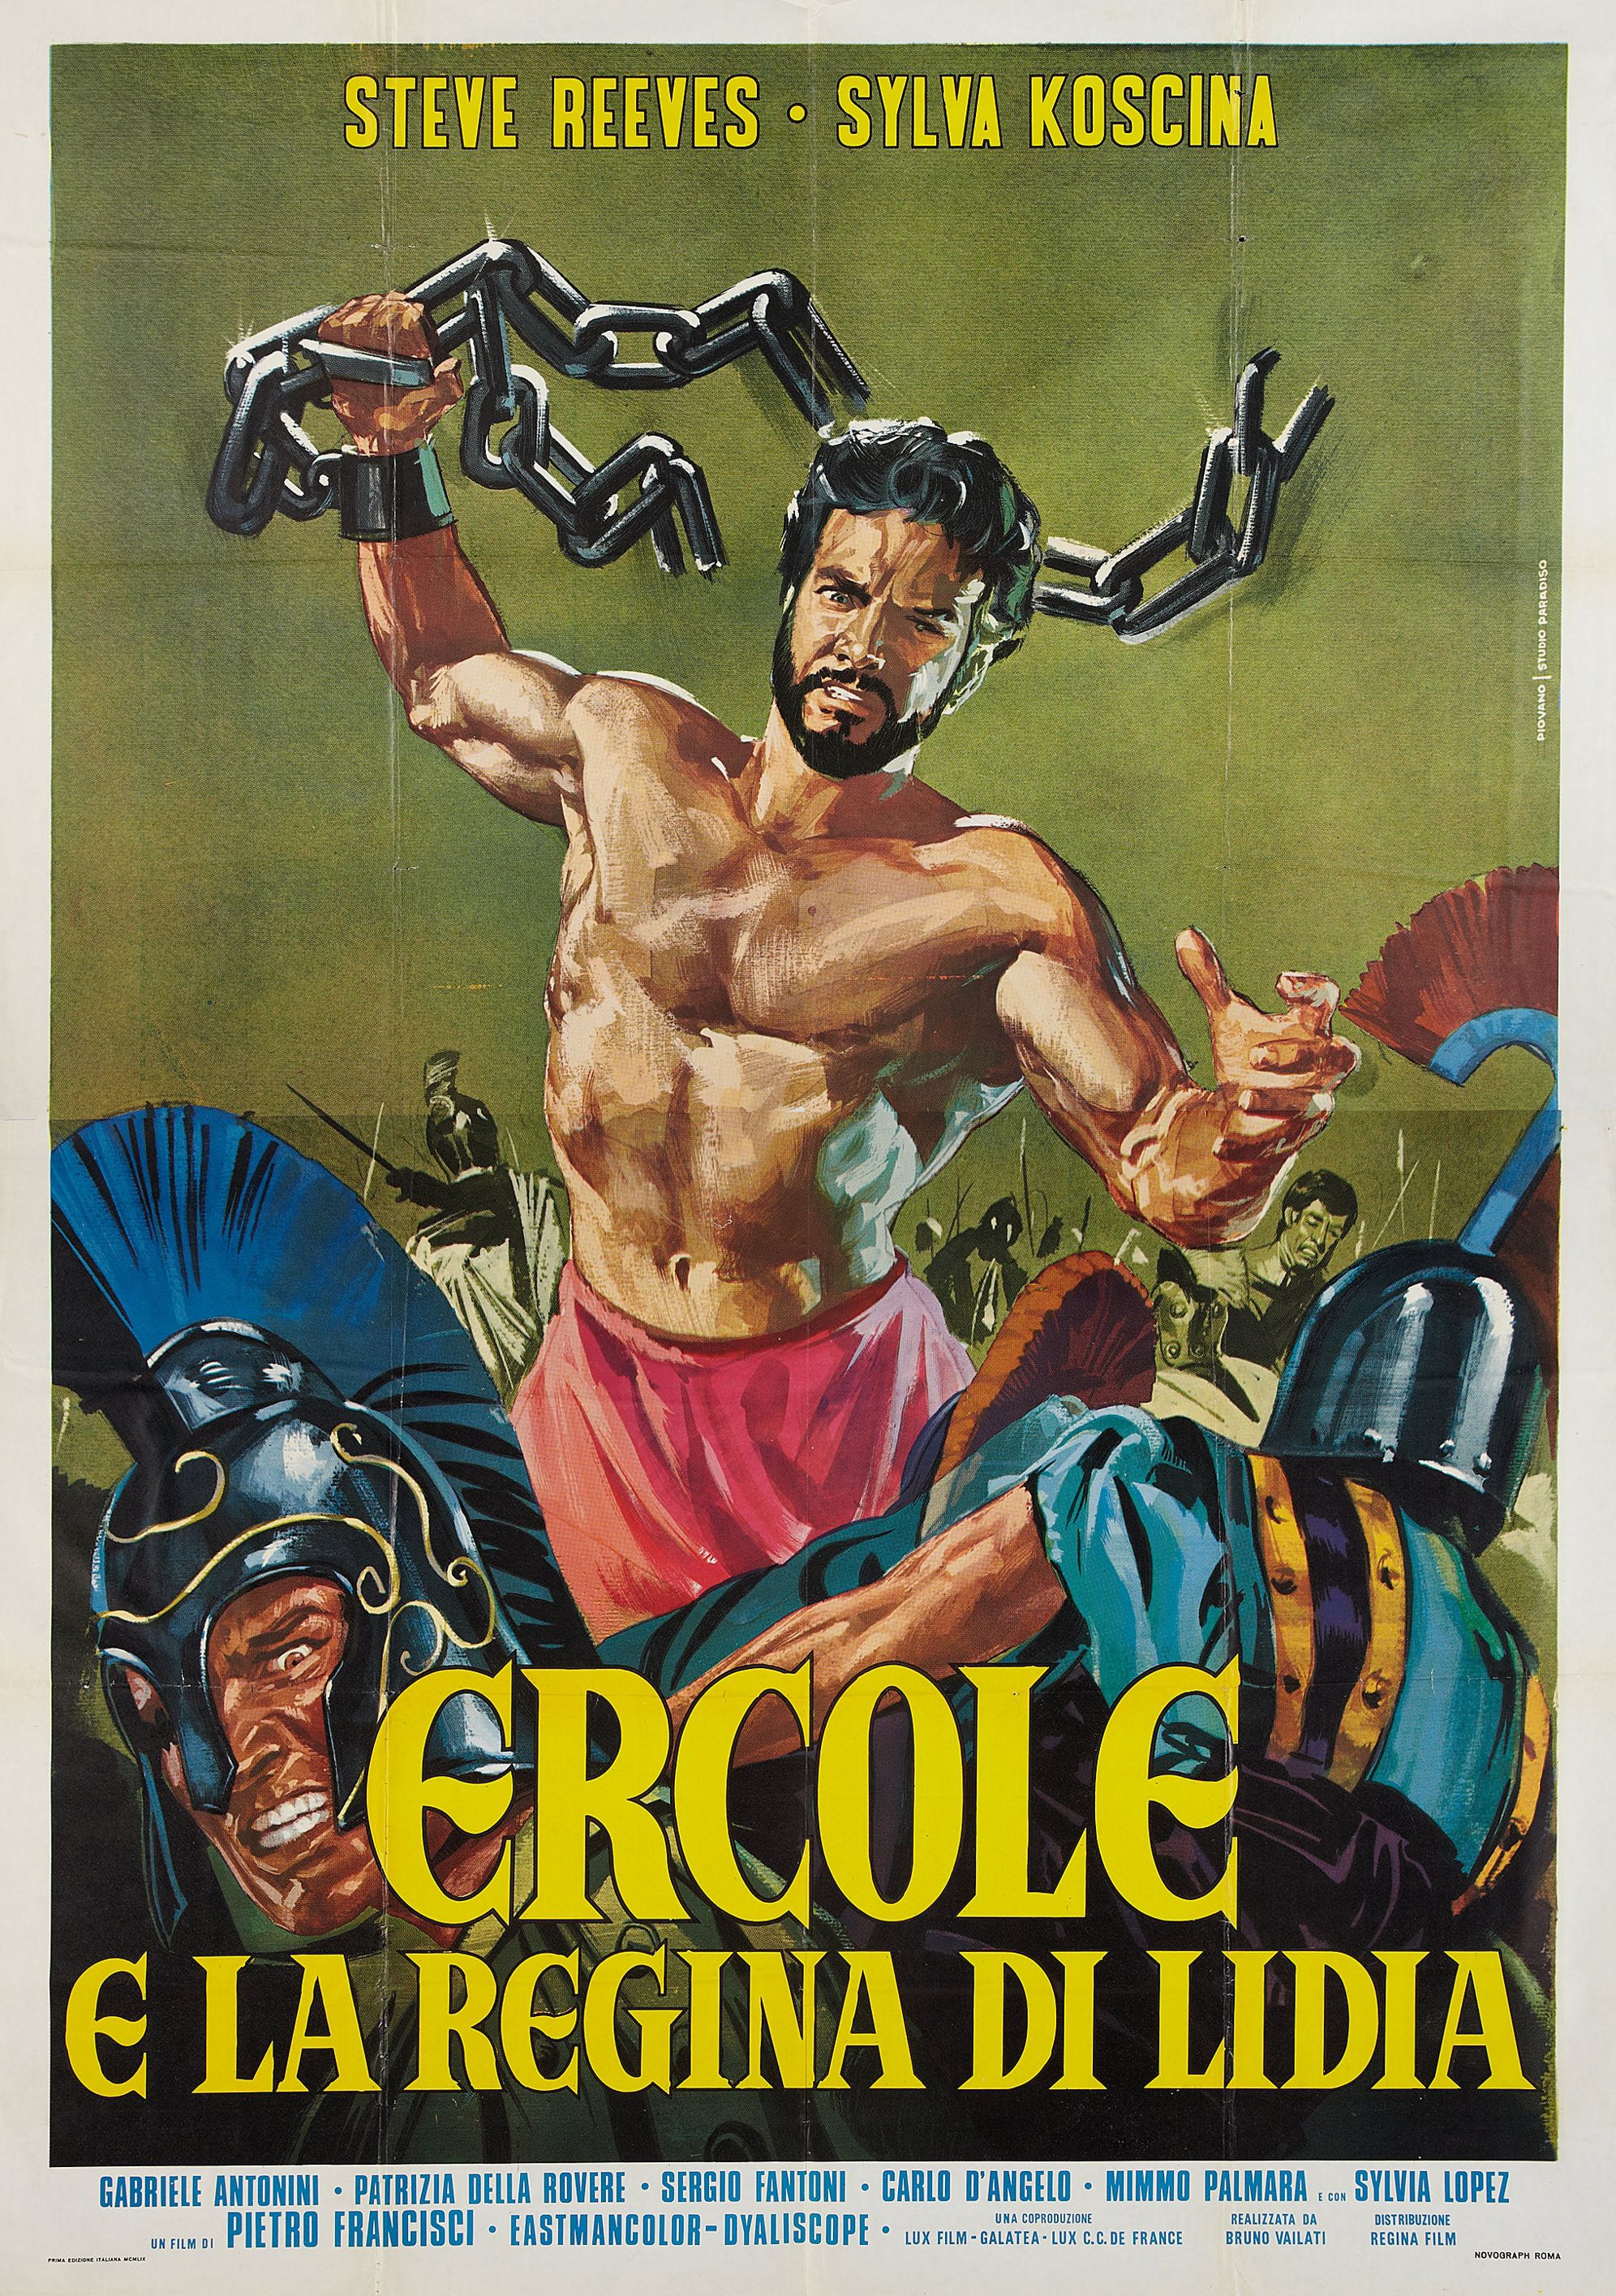 Hercules Unchained (1959) with English Subtitles on DVD on DVD